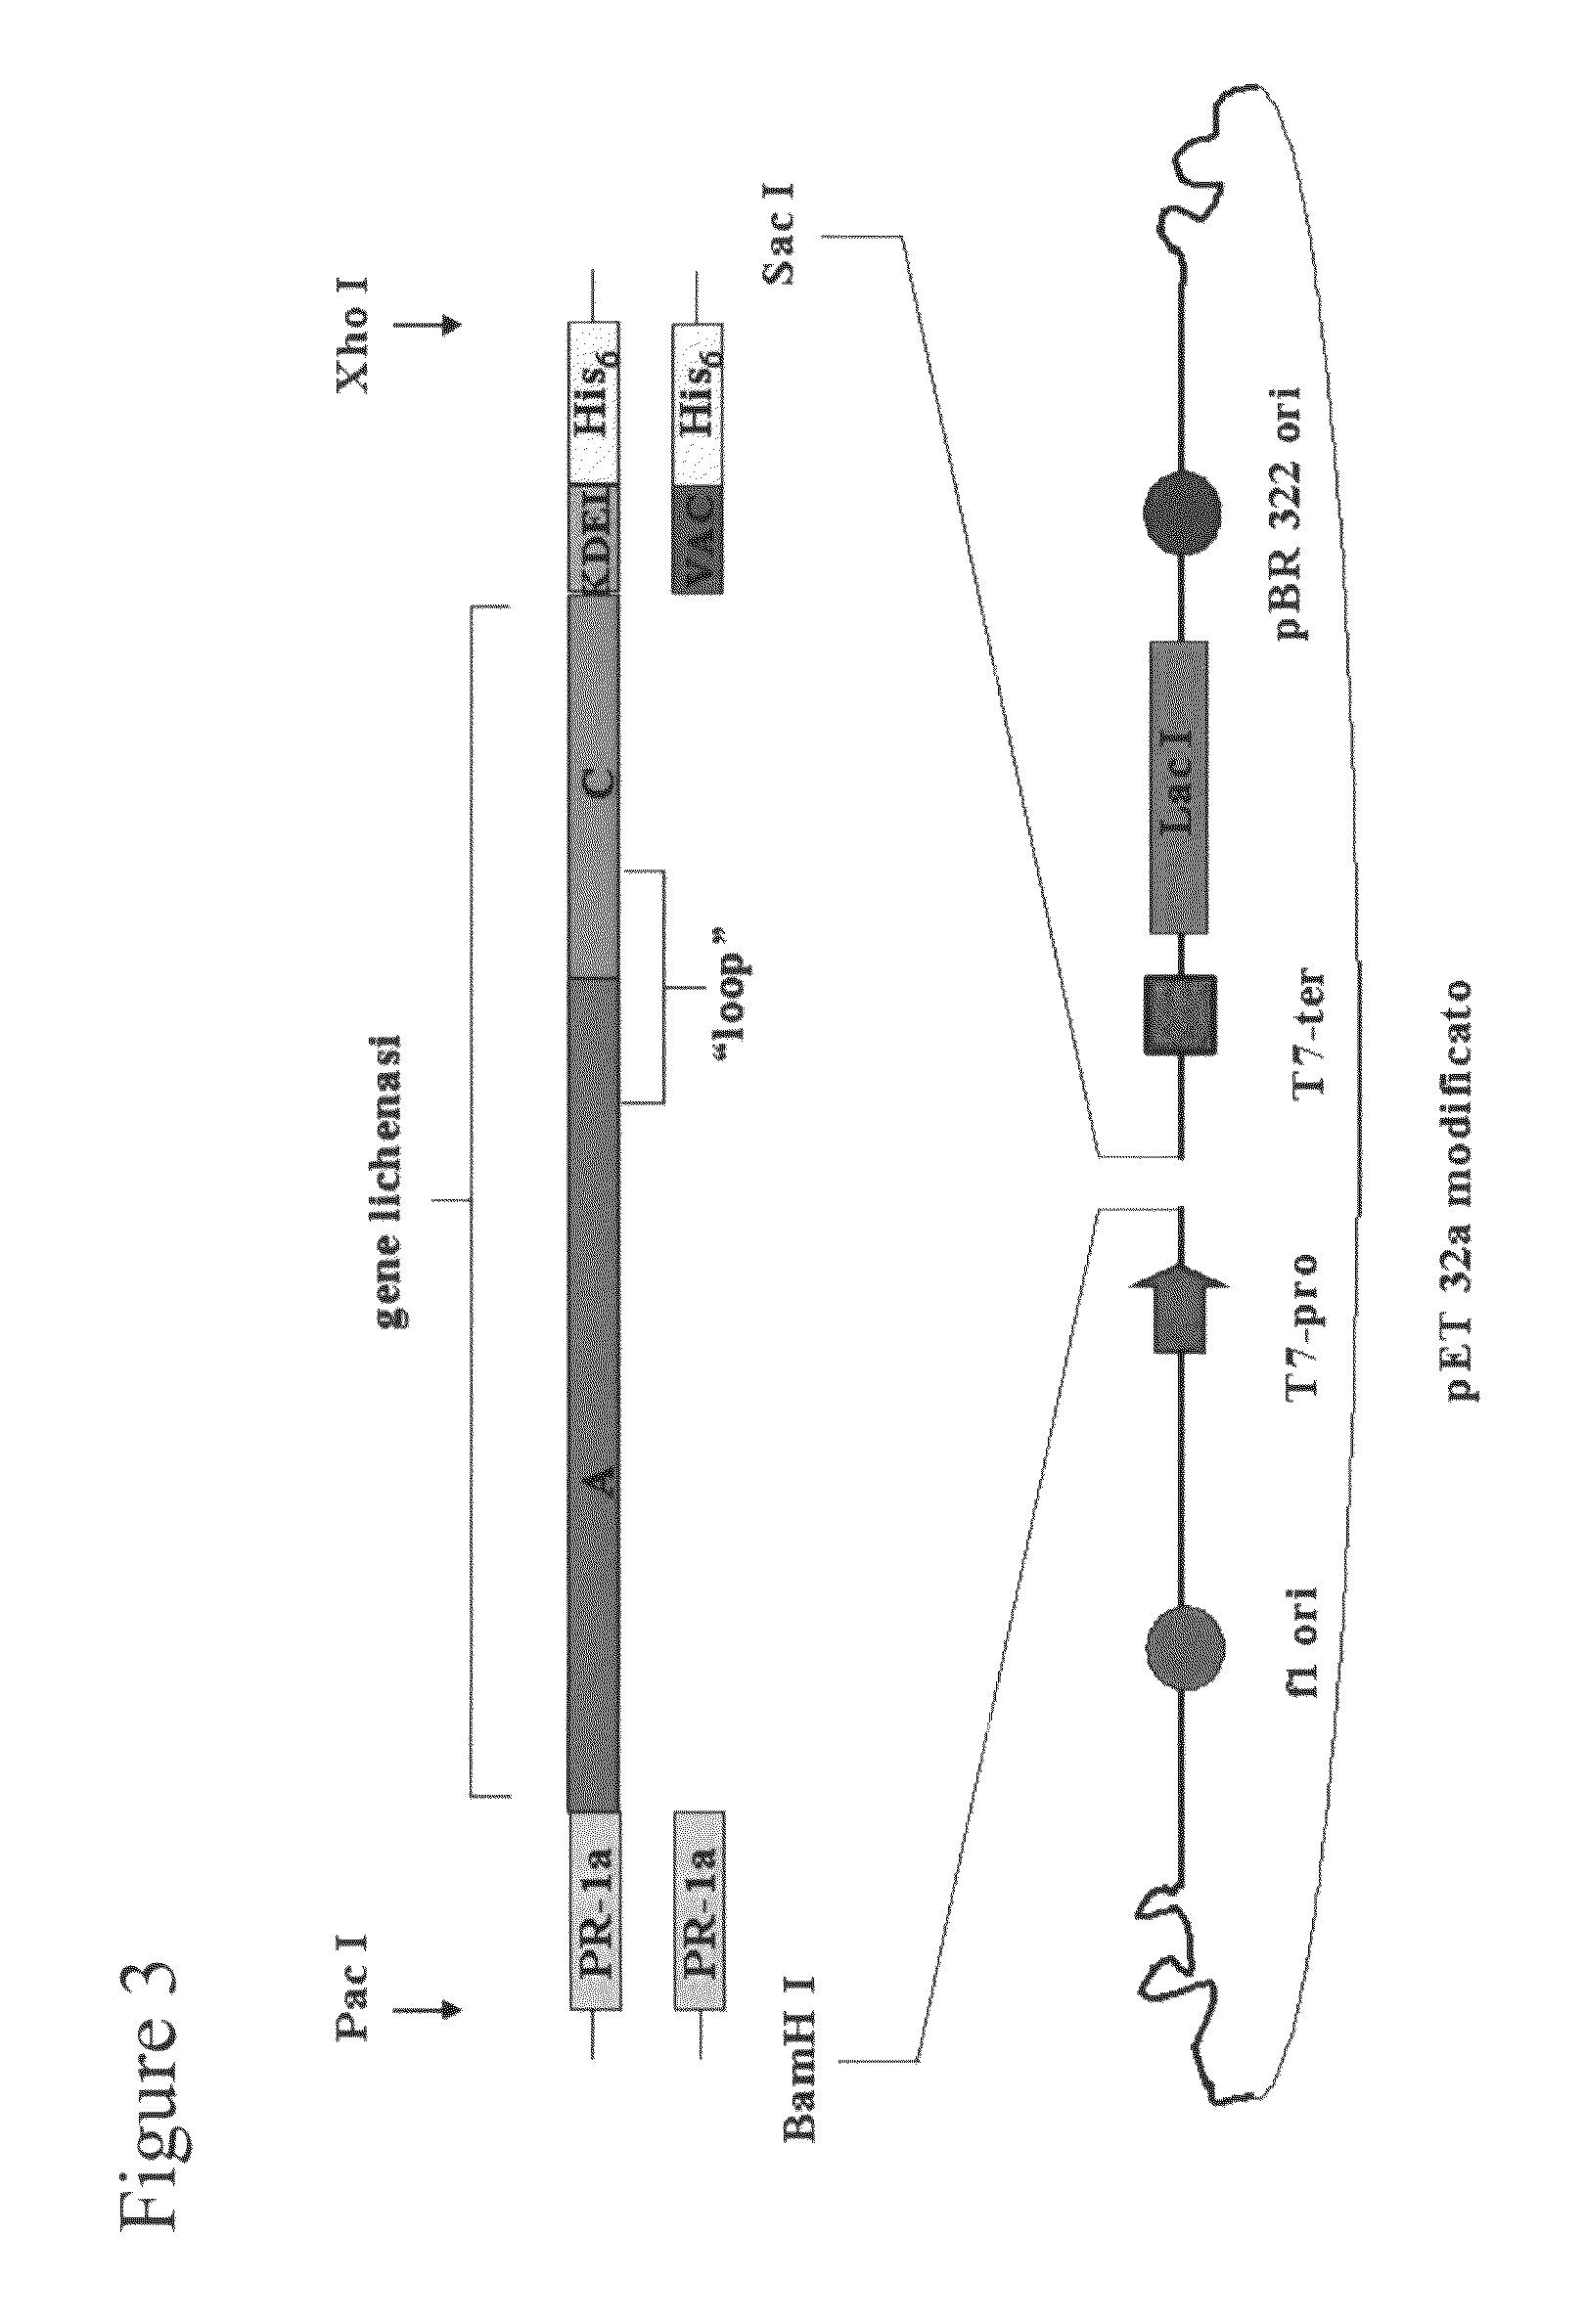 Influenza antigens, vaccine compositions, and related methods